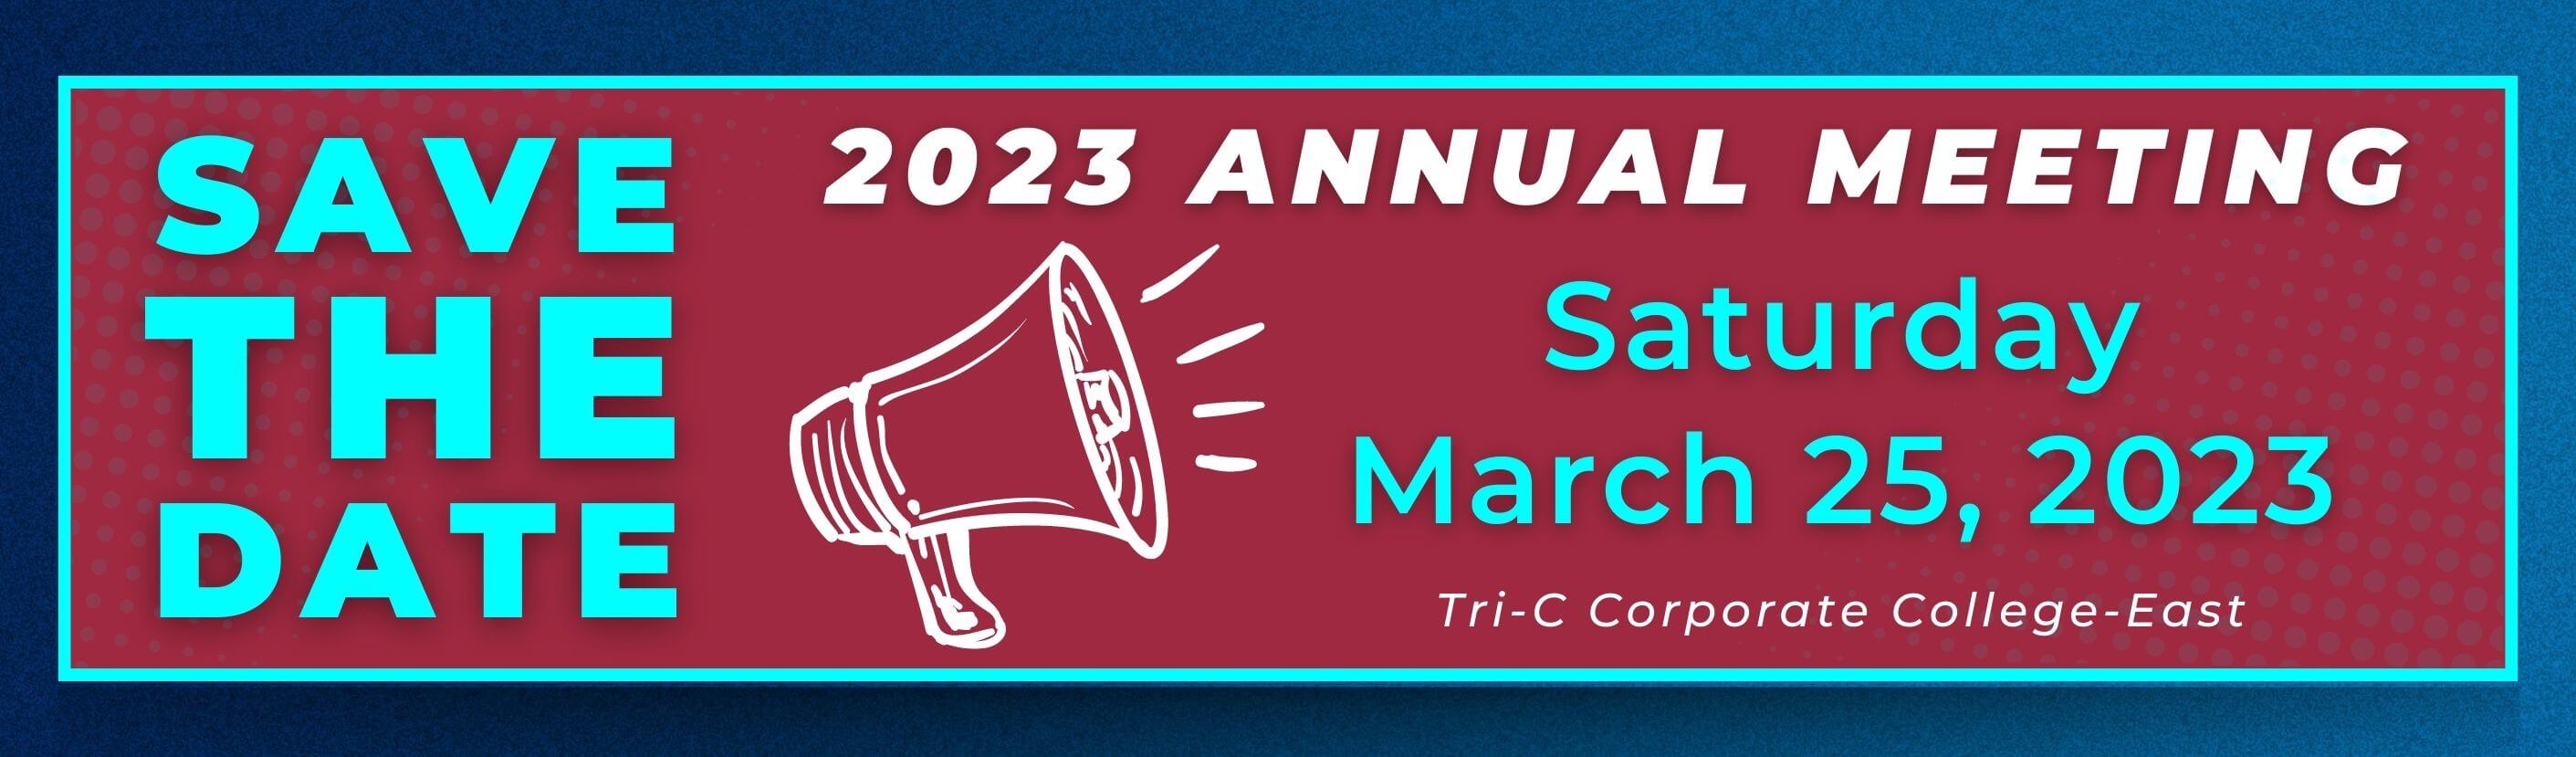 2023 Annual Meeting Save the Date